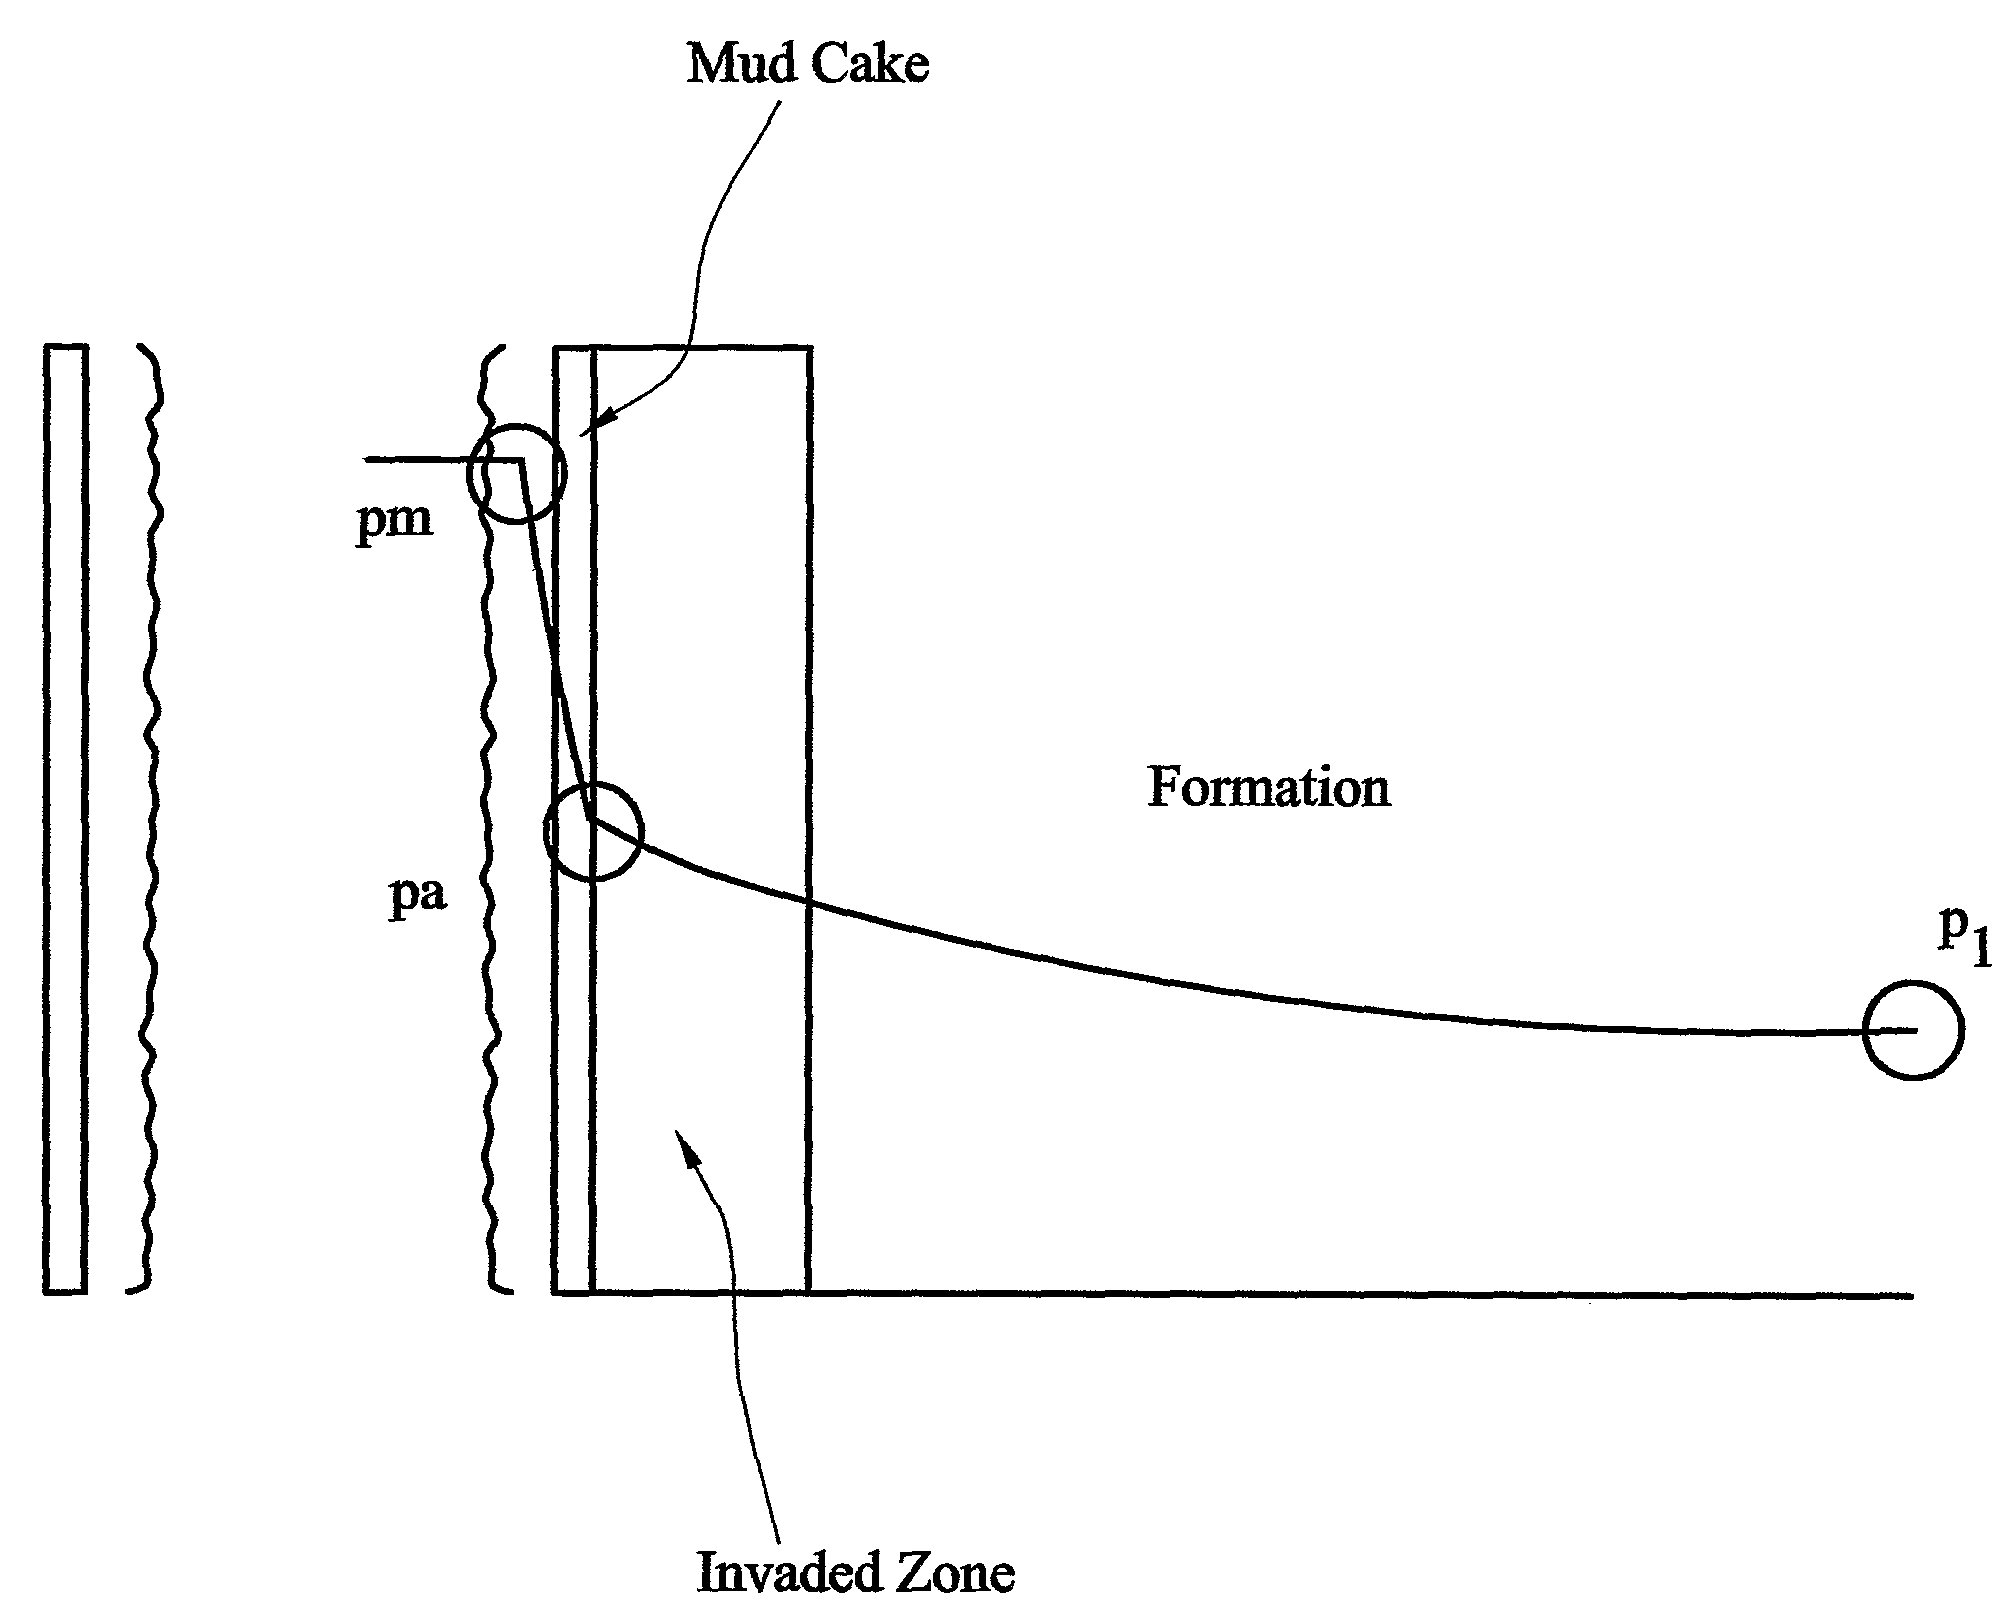 Method for analysis of pressure response in underground formations